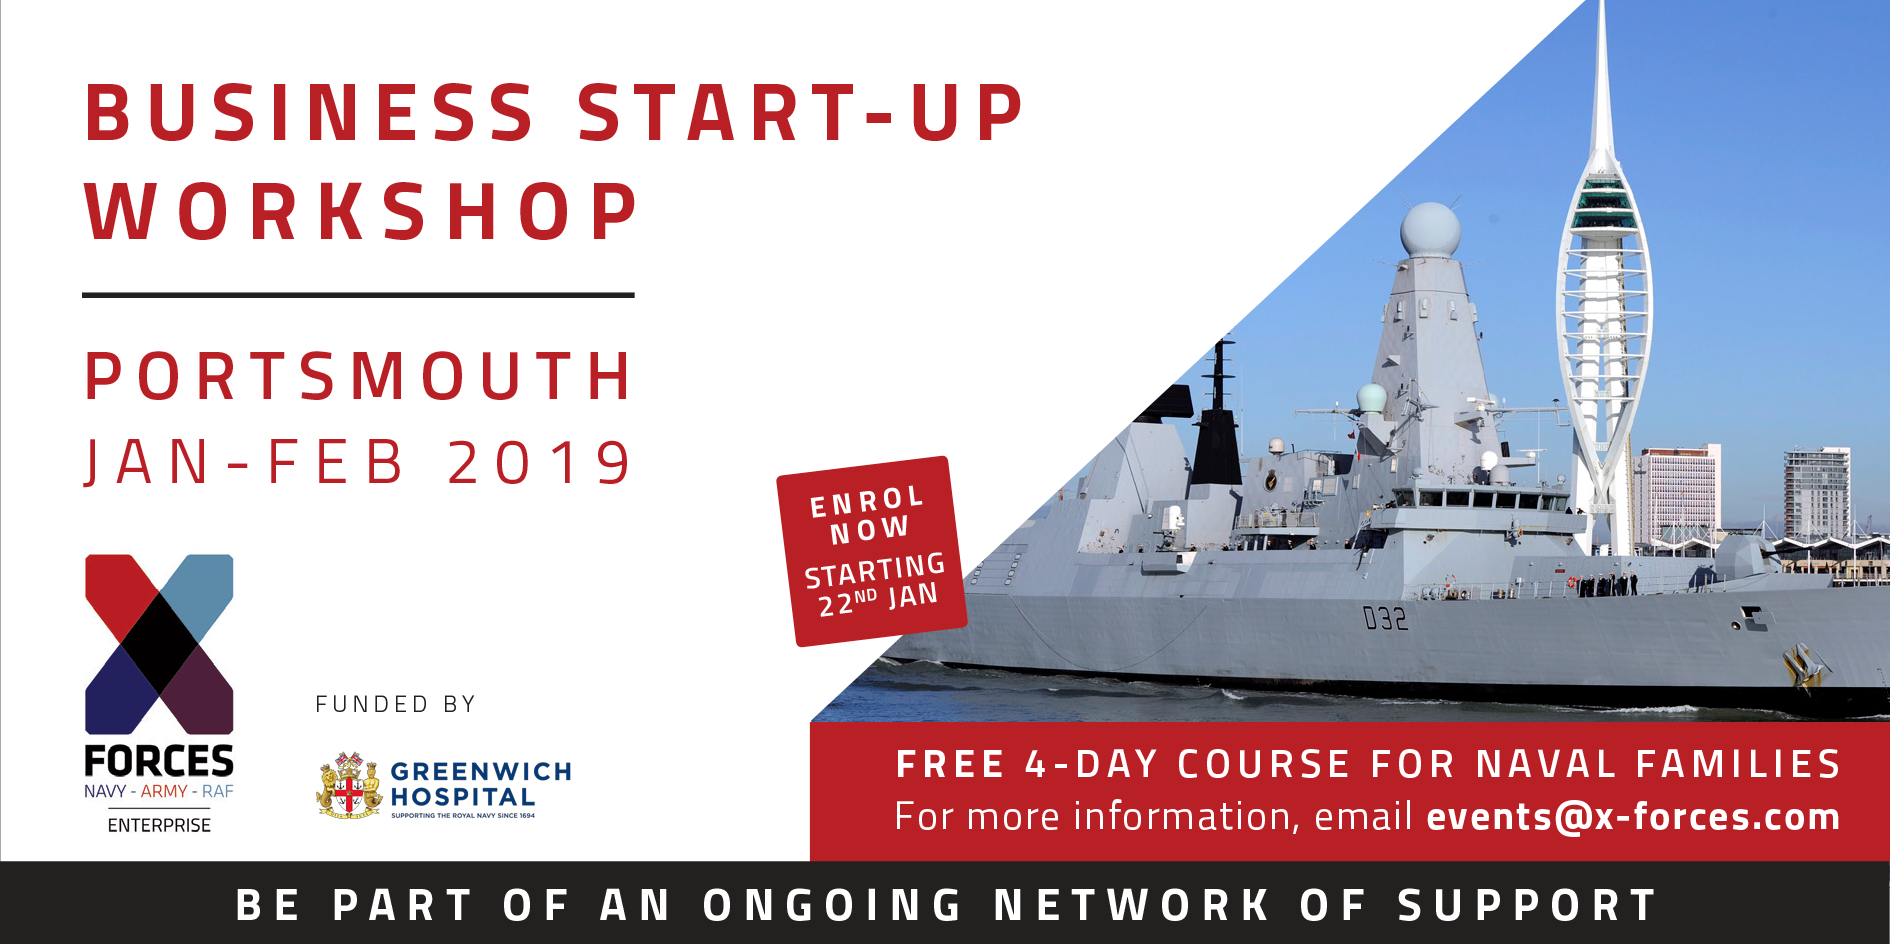 Business Start-Up Workshop Tailored for Naval Families